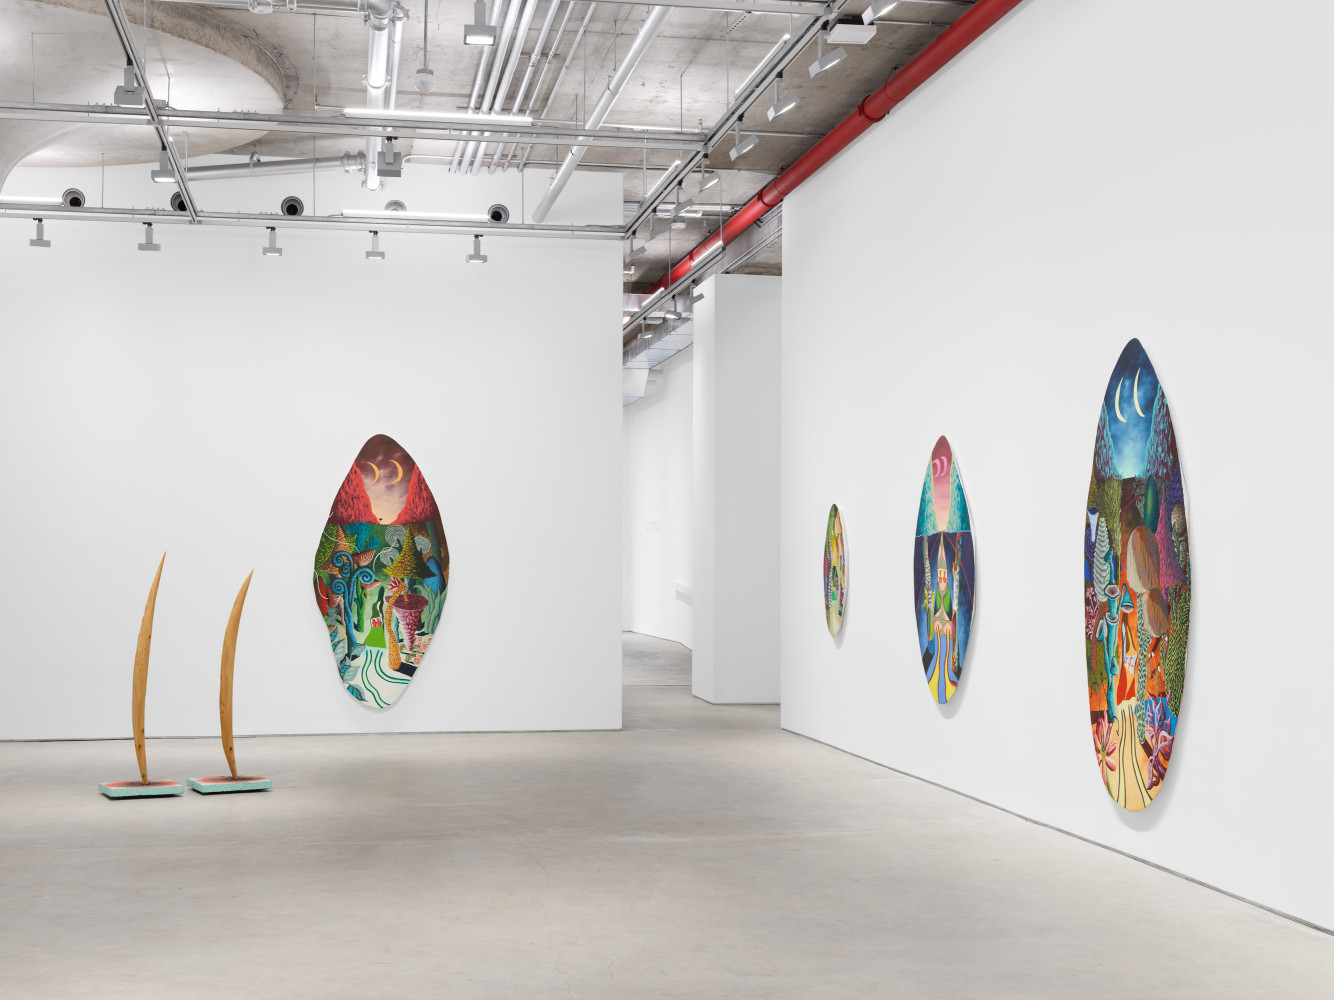 Eliot Greenwald: Never Lose Your Shadow (installation view)